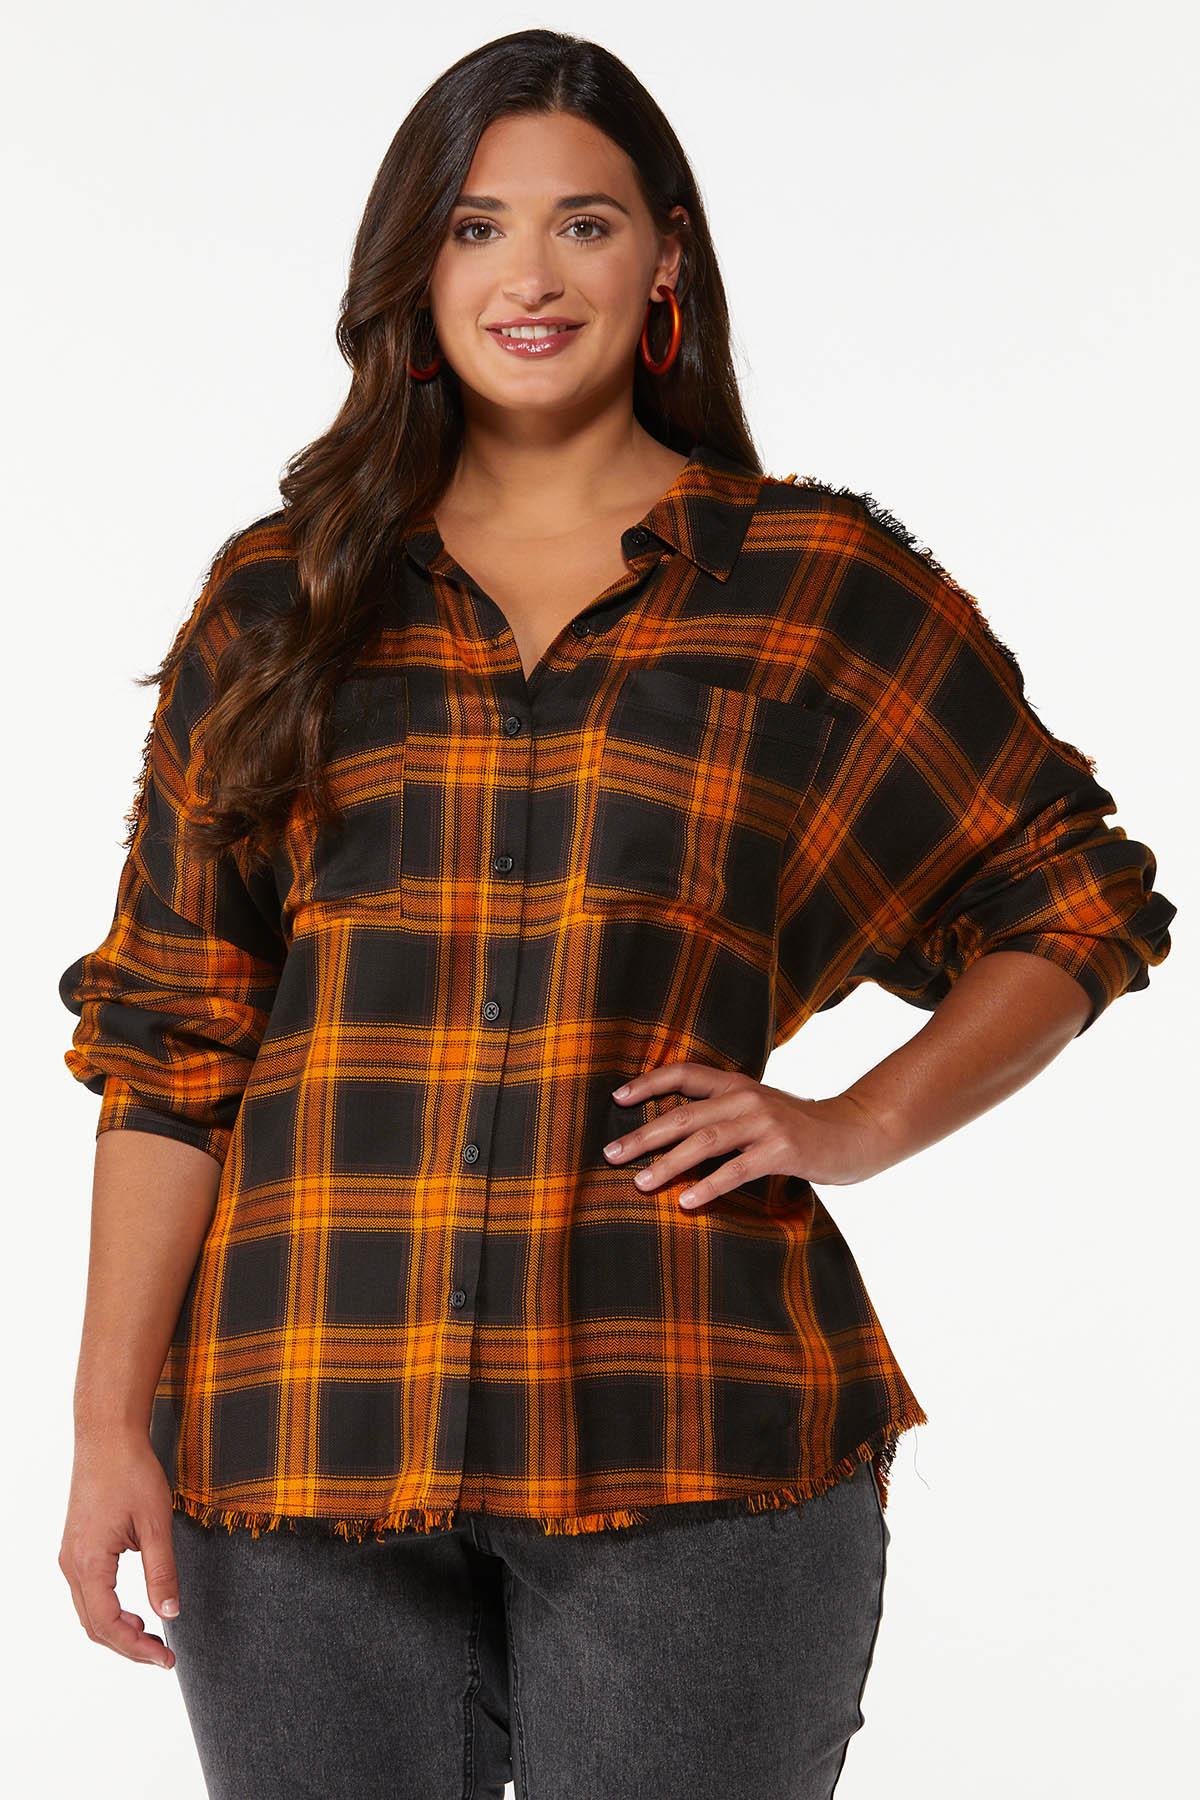 Plus Size Frayed Plaid Collared Top